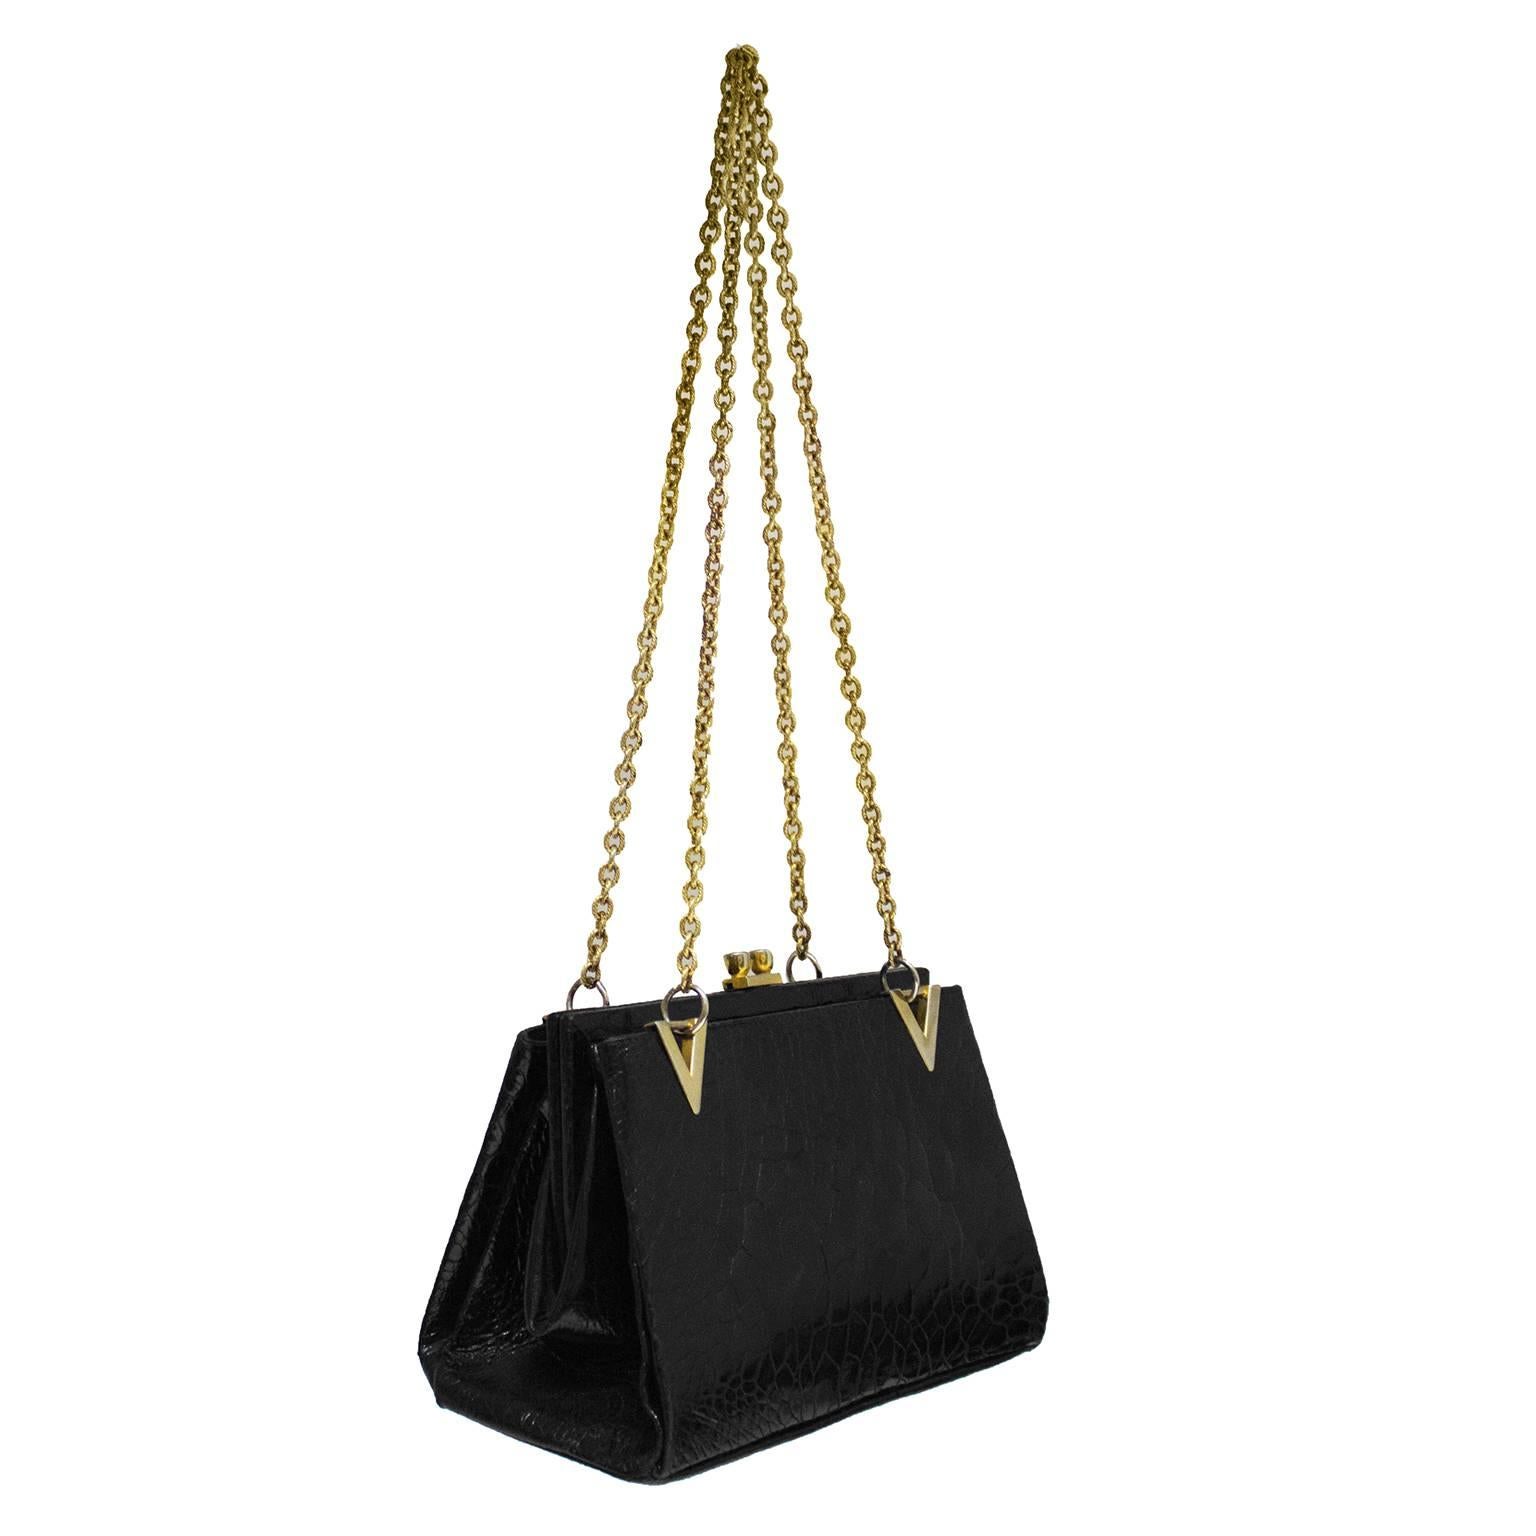 Beautiful 1960's Italian farm raised black skin shoulder bag with gold chain shoulder straps and V shaped detailed hardware. The expandable bag features two open exterior pockets and one hinge closure interior pocket. Zipper and open pocket